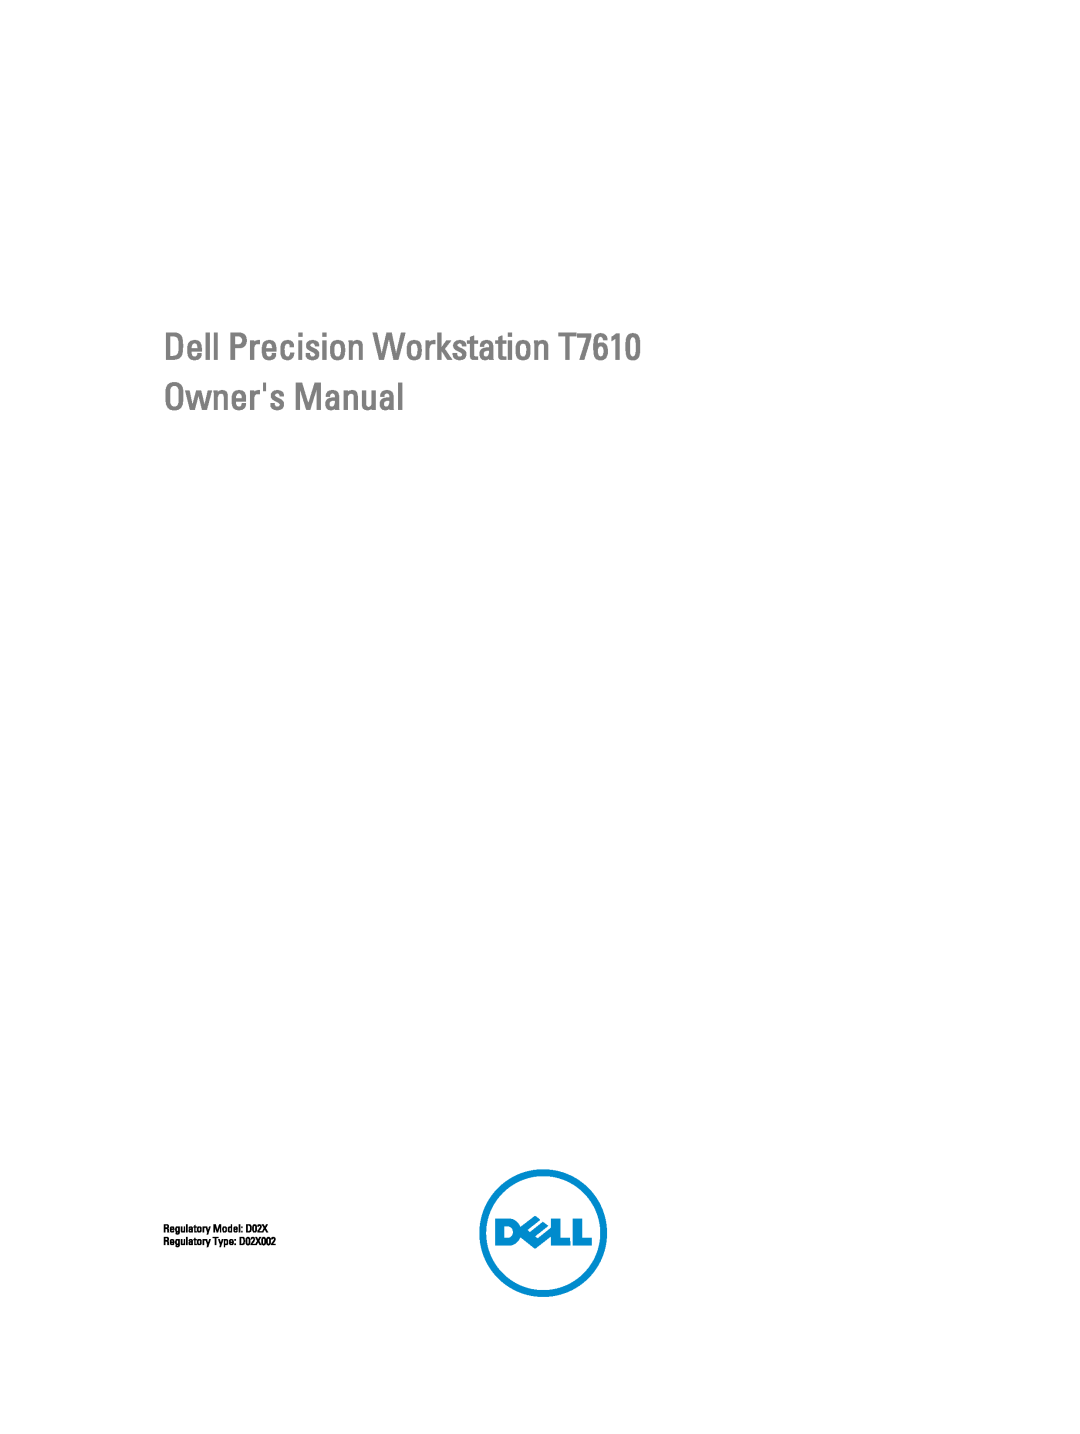 Dell owner manual Dell Precision Workstation T7610 Owners Manual, Regulatory Model D02X Regulatory Type D02X002 